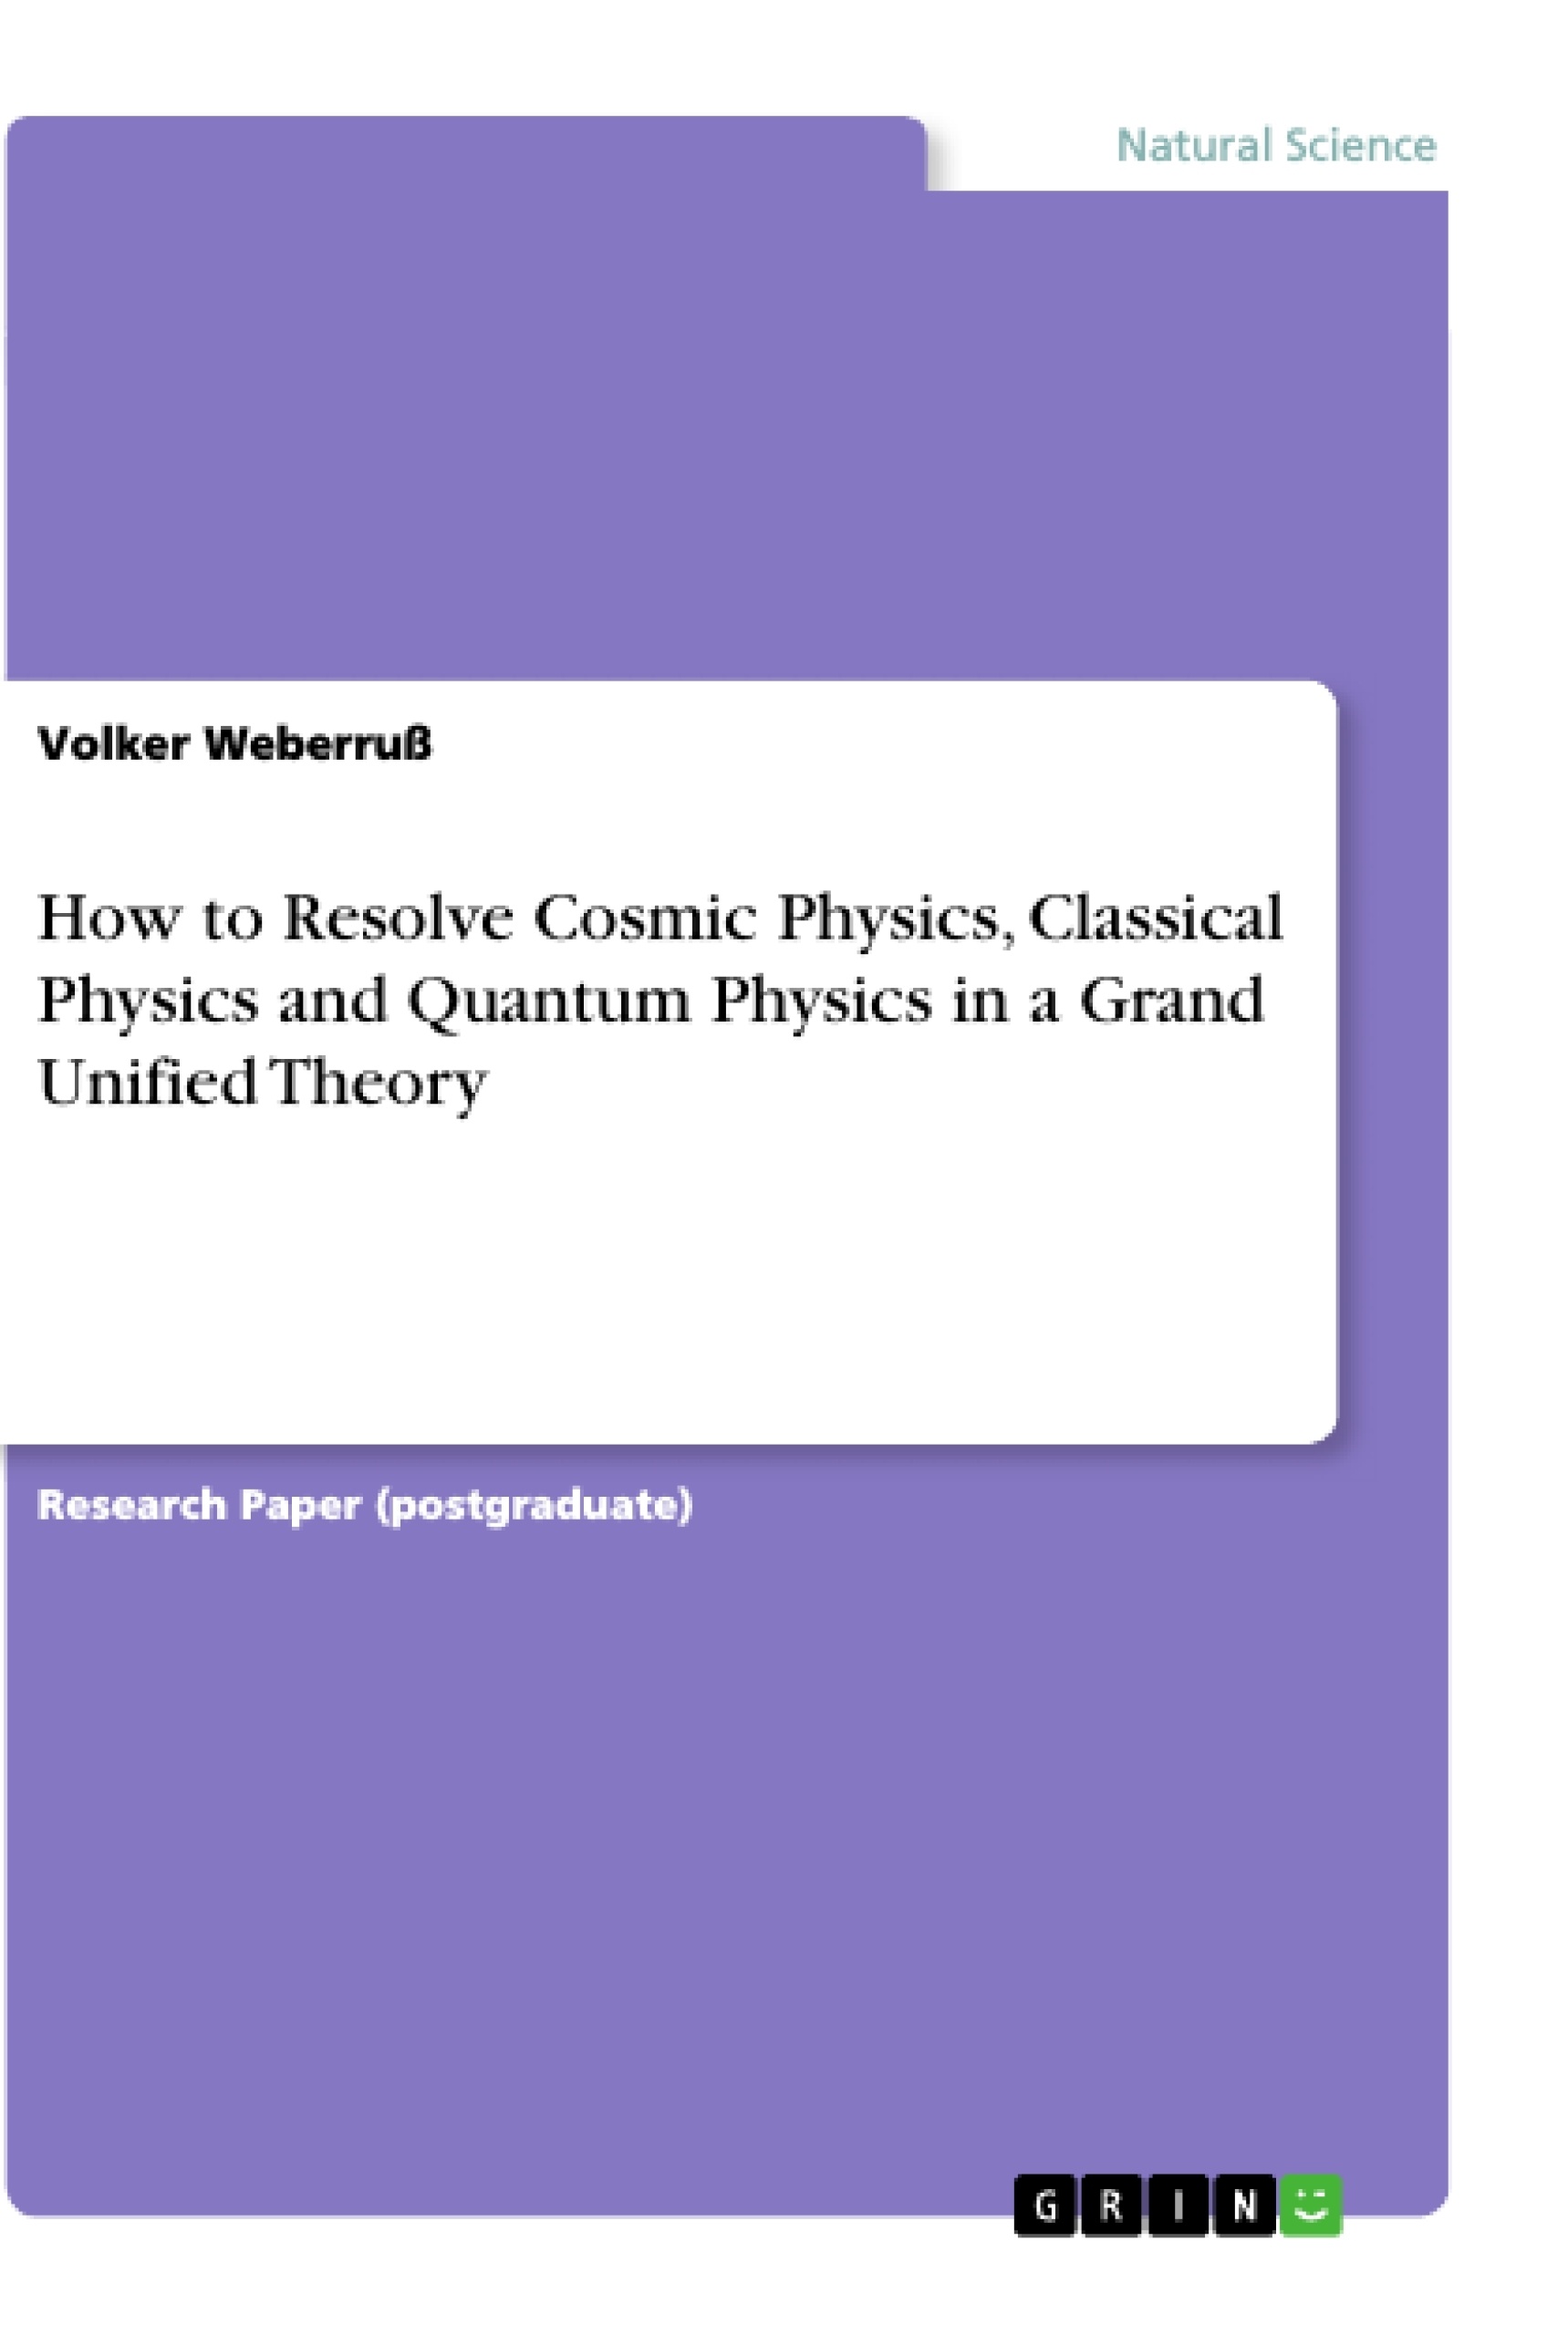 Title: How to Resolve Cosmic Physics, Classical Physics and Quantum Physics in a Grand Unified Theory